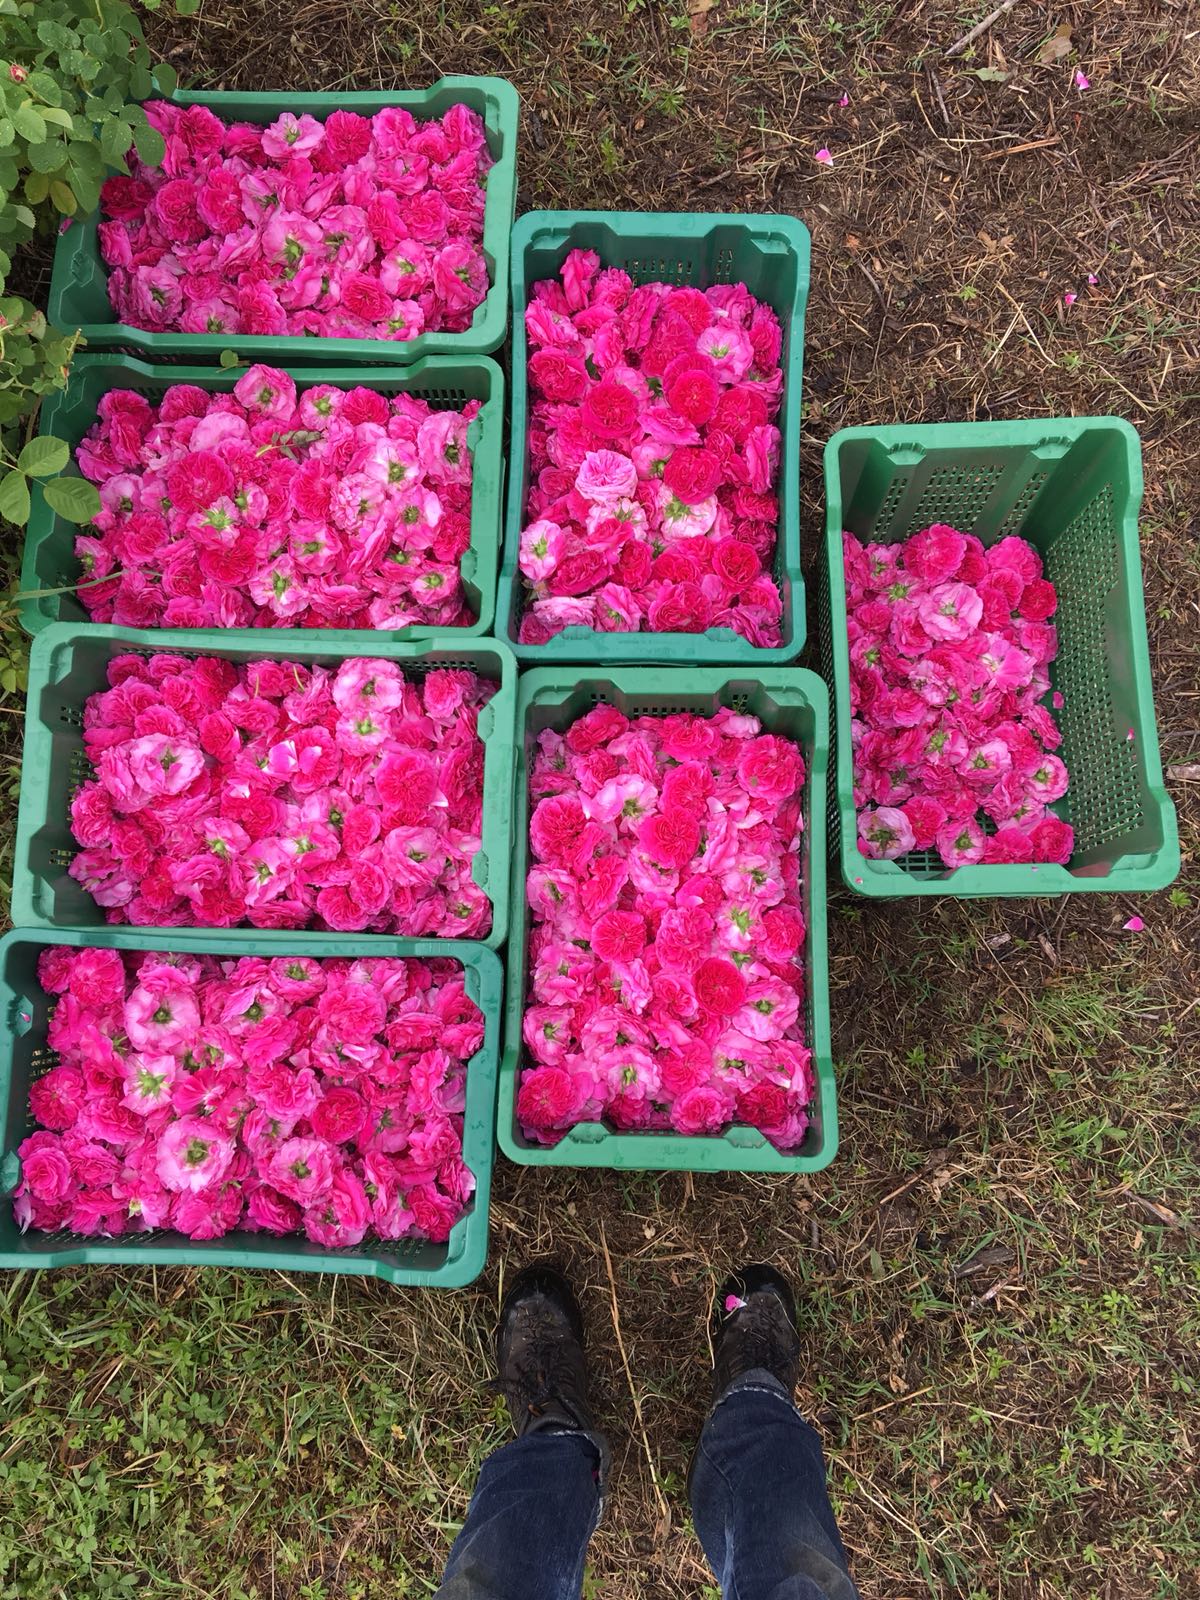 Bushels of freshly plucked Duke of Cambridge roses, which are used to make our organic gulkand.